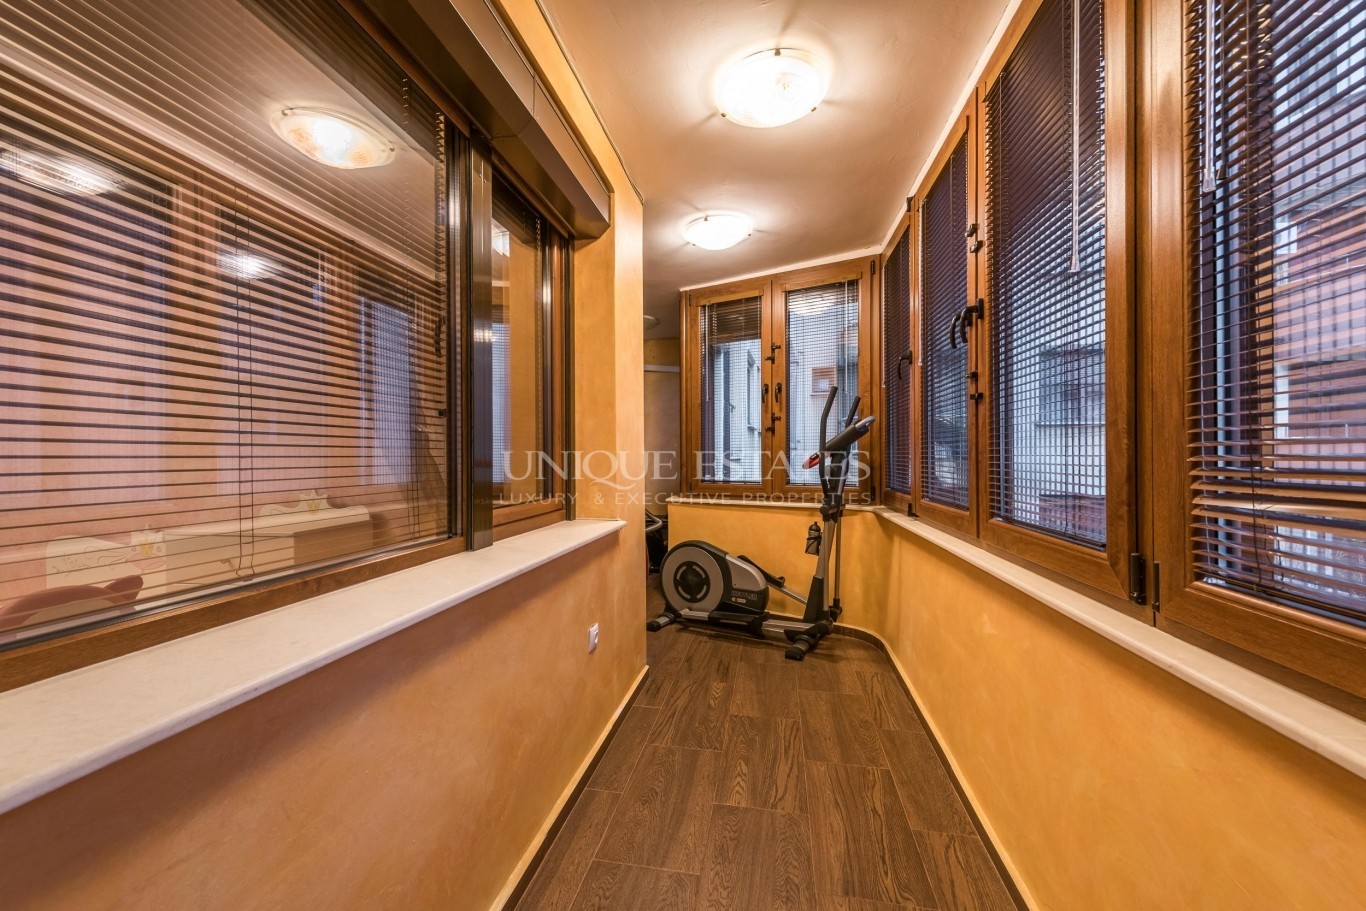 Apartment for sale in Sofia, Ivan Vazov with listing ID: K8929 - image 9